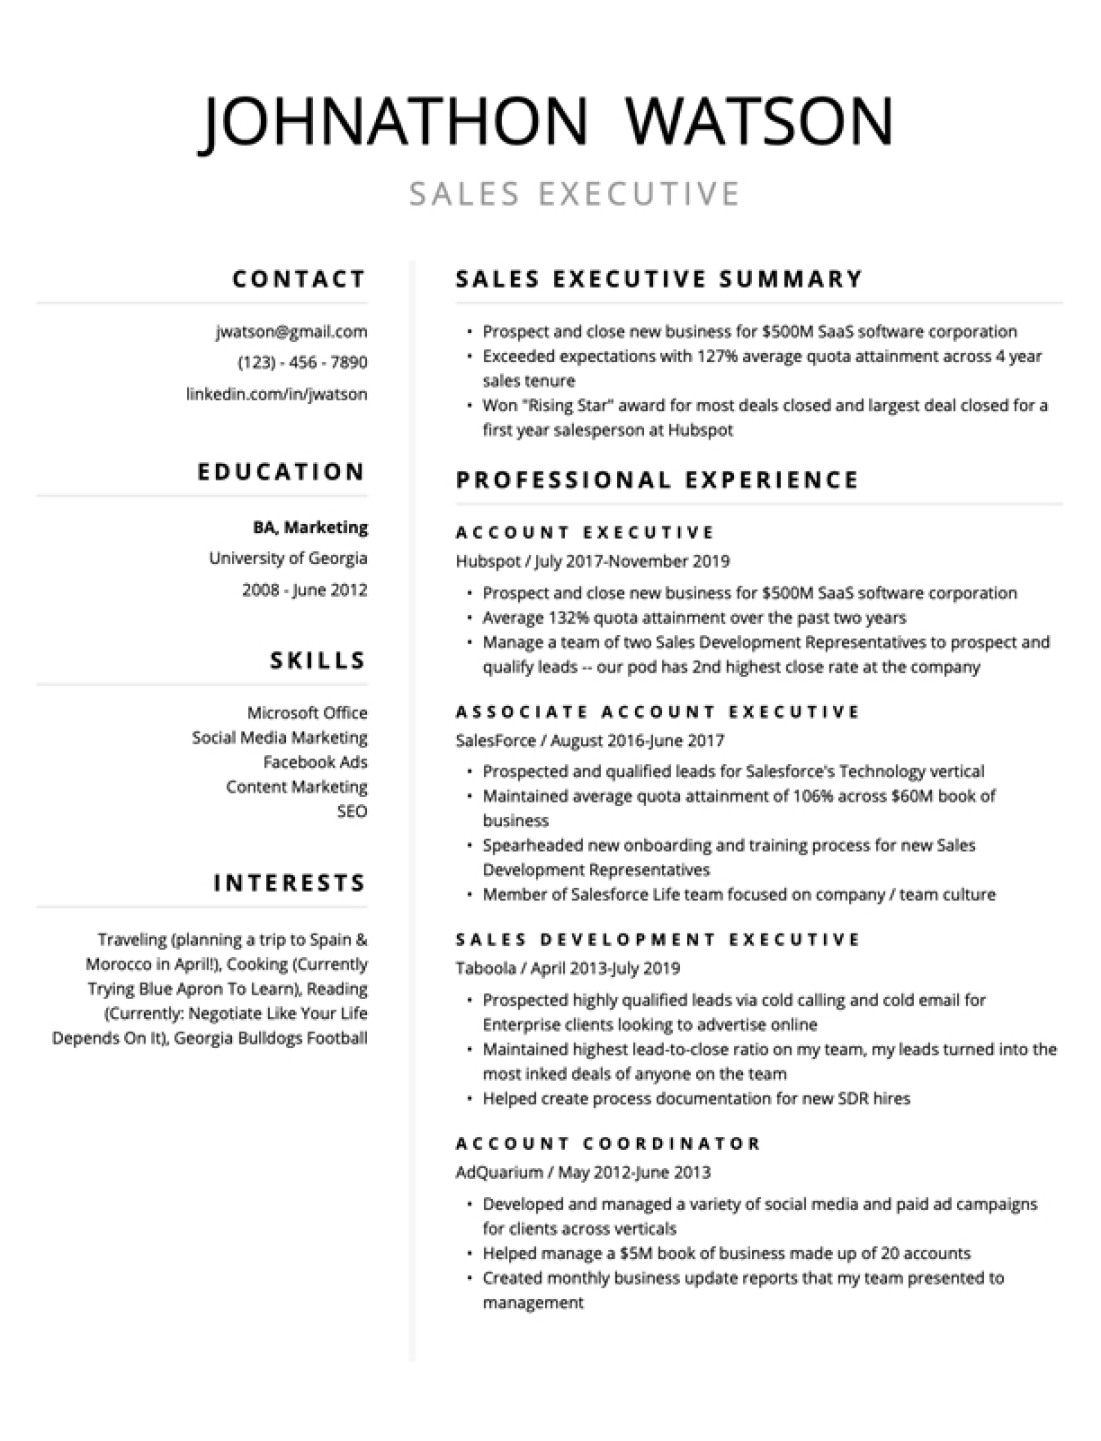 free resume templates for edit amp download resybuild io